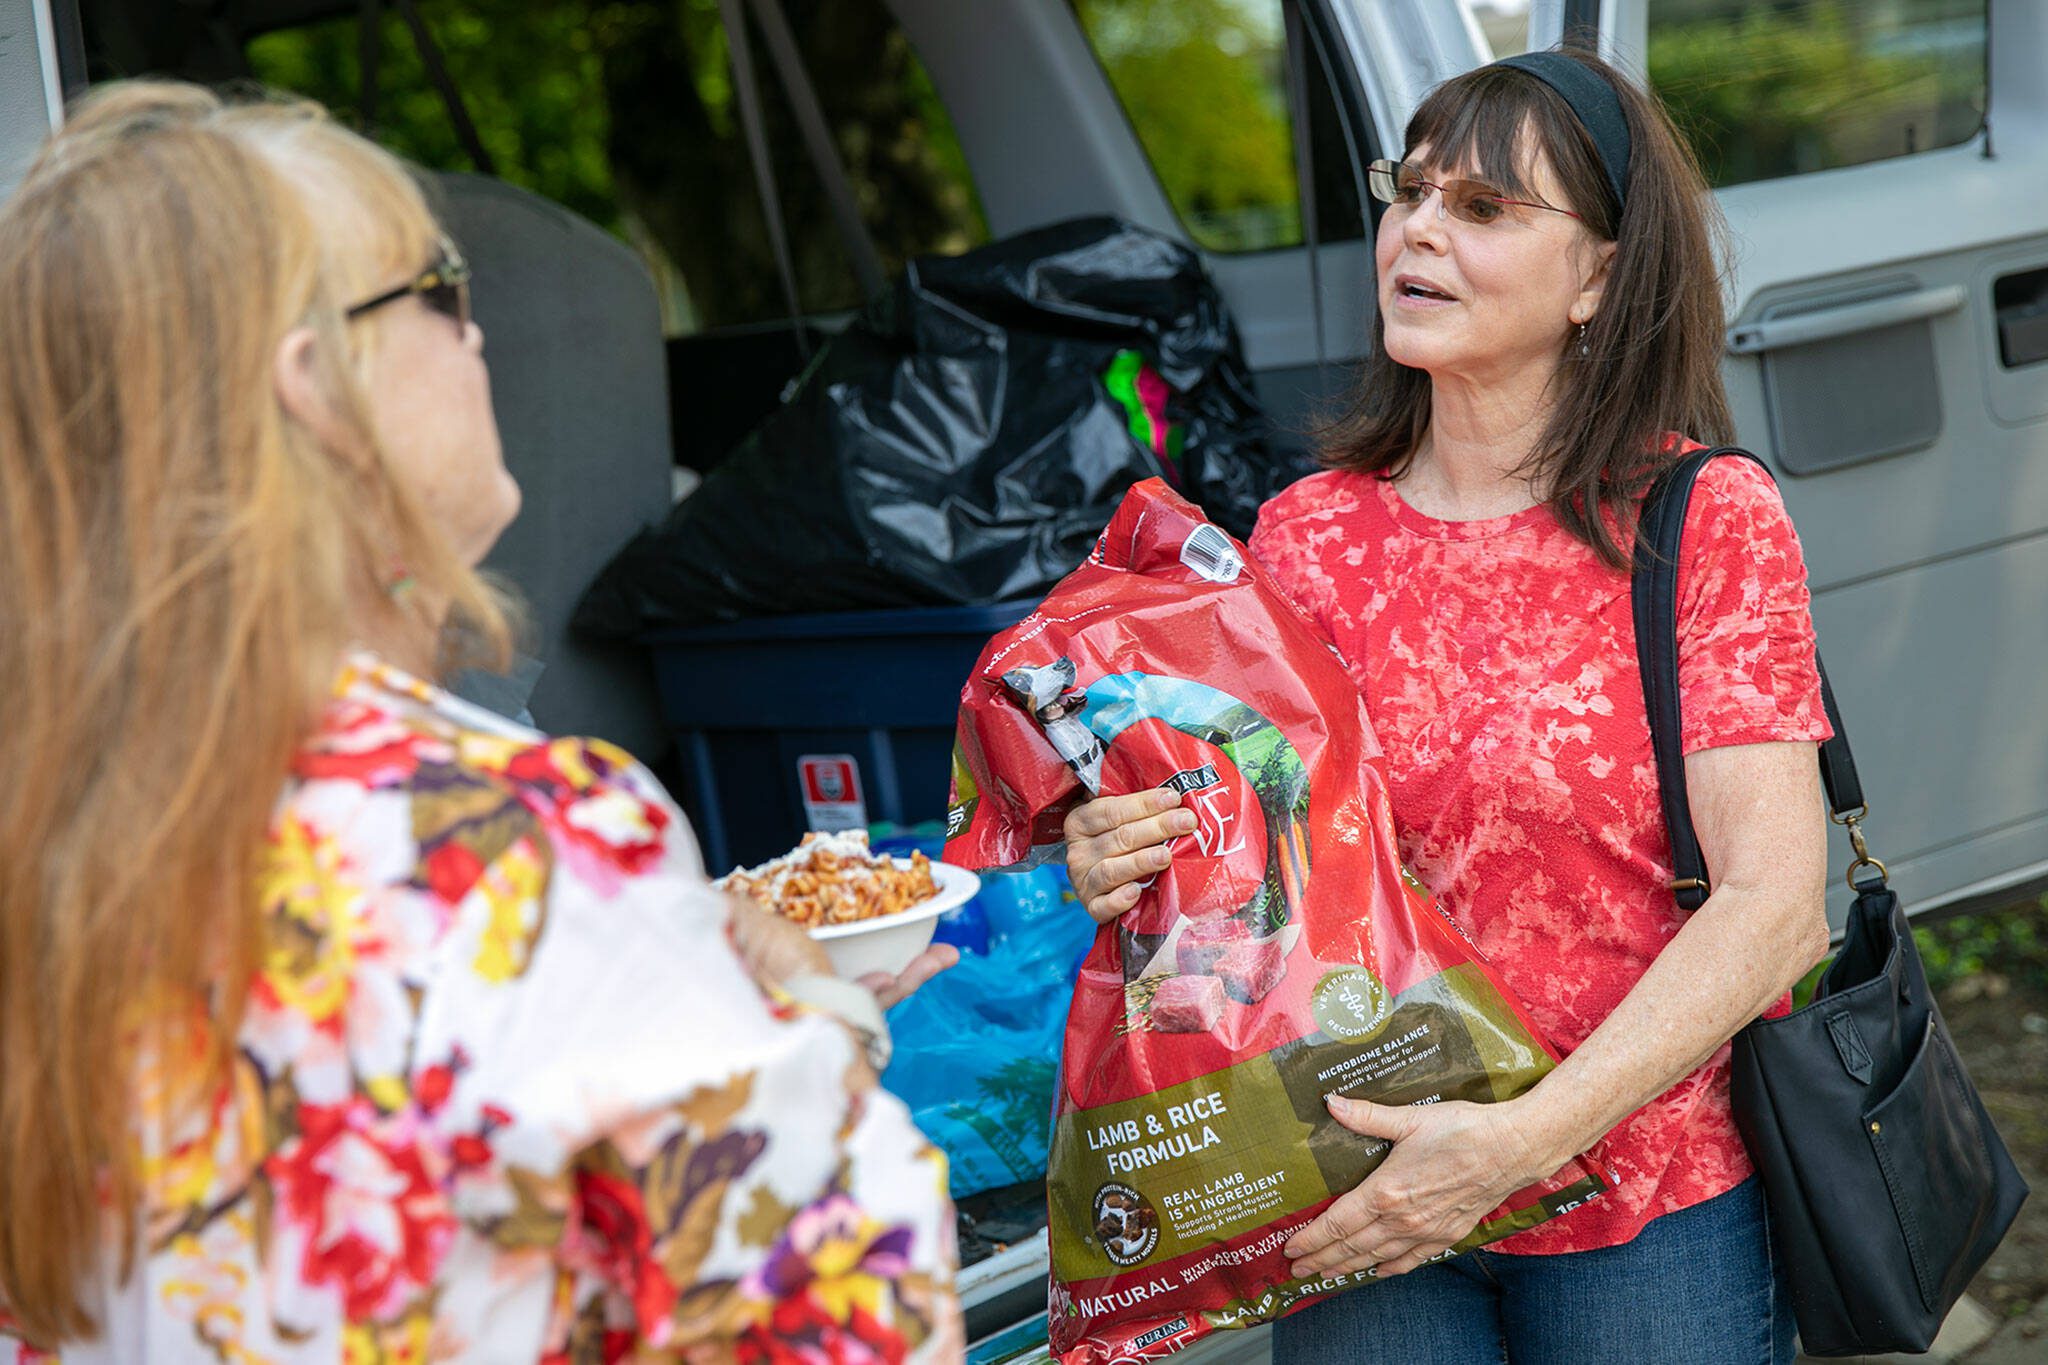 Penelope Protheroe, President and Founder of Angel Resource Connection carries a bag of dog food over to a person’s car while helping distribute food and other supplies on Wednesday, May 17, 2023, in Everett, Washington. (Ryan Berry / The Herald)